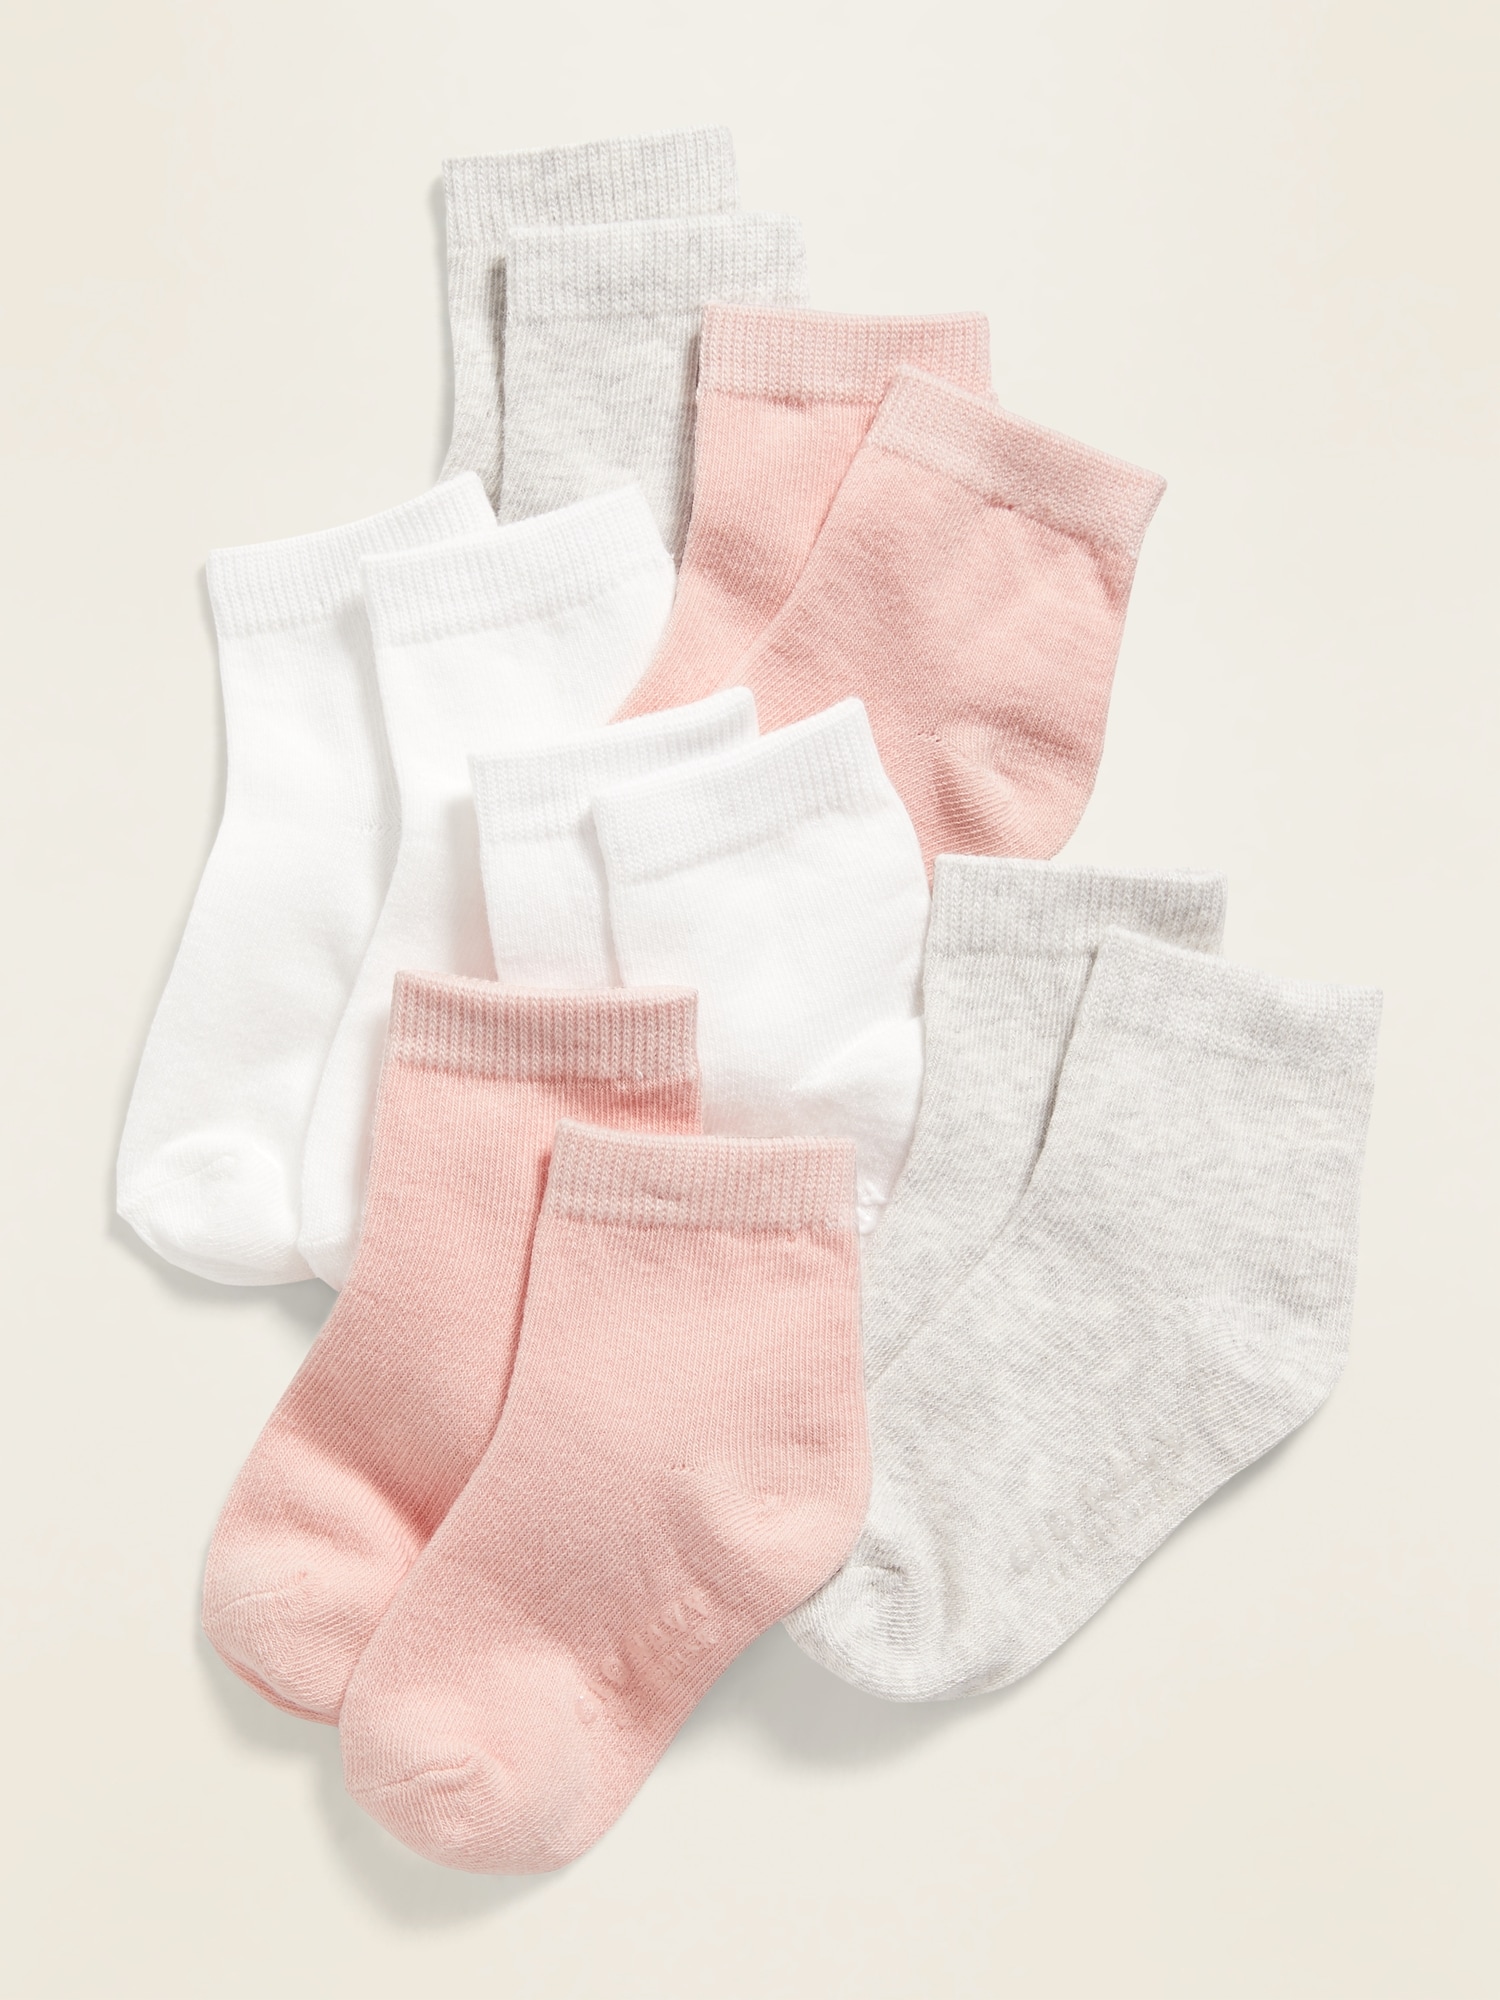 Baby Socks with Grips Newborn Toddler Non Skid Cotton Crew Socks 6Pack 6-36Month